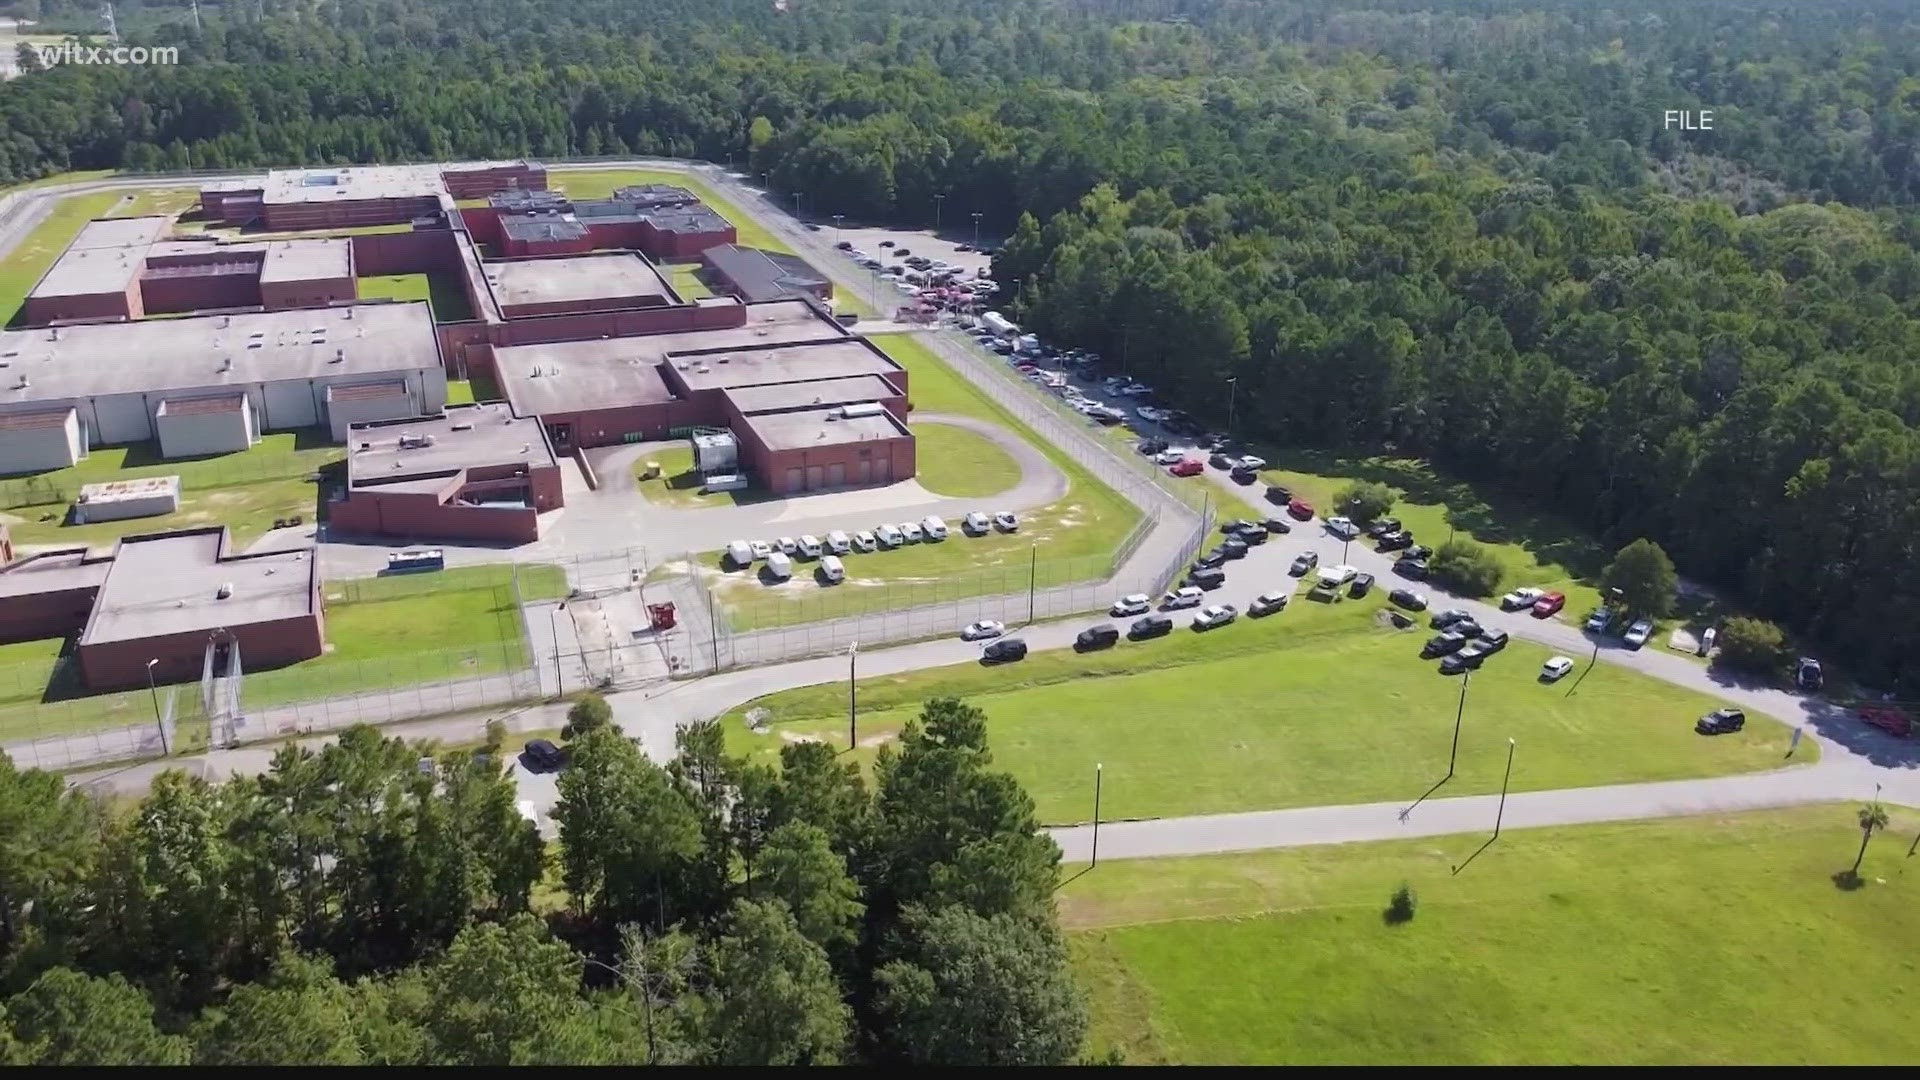 The plan is currently being looked at by the South Carolina Department of Corrections.